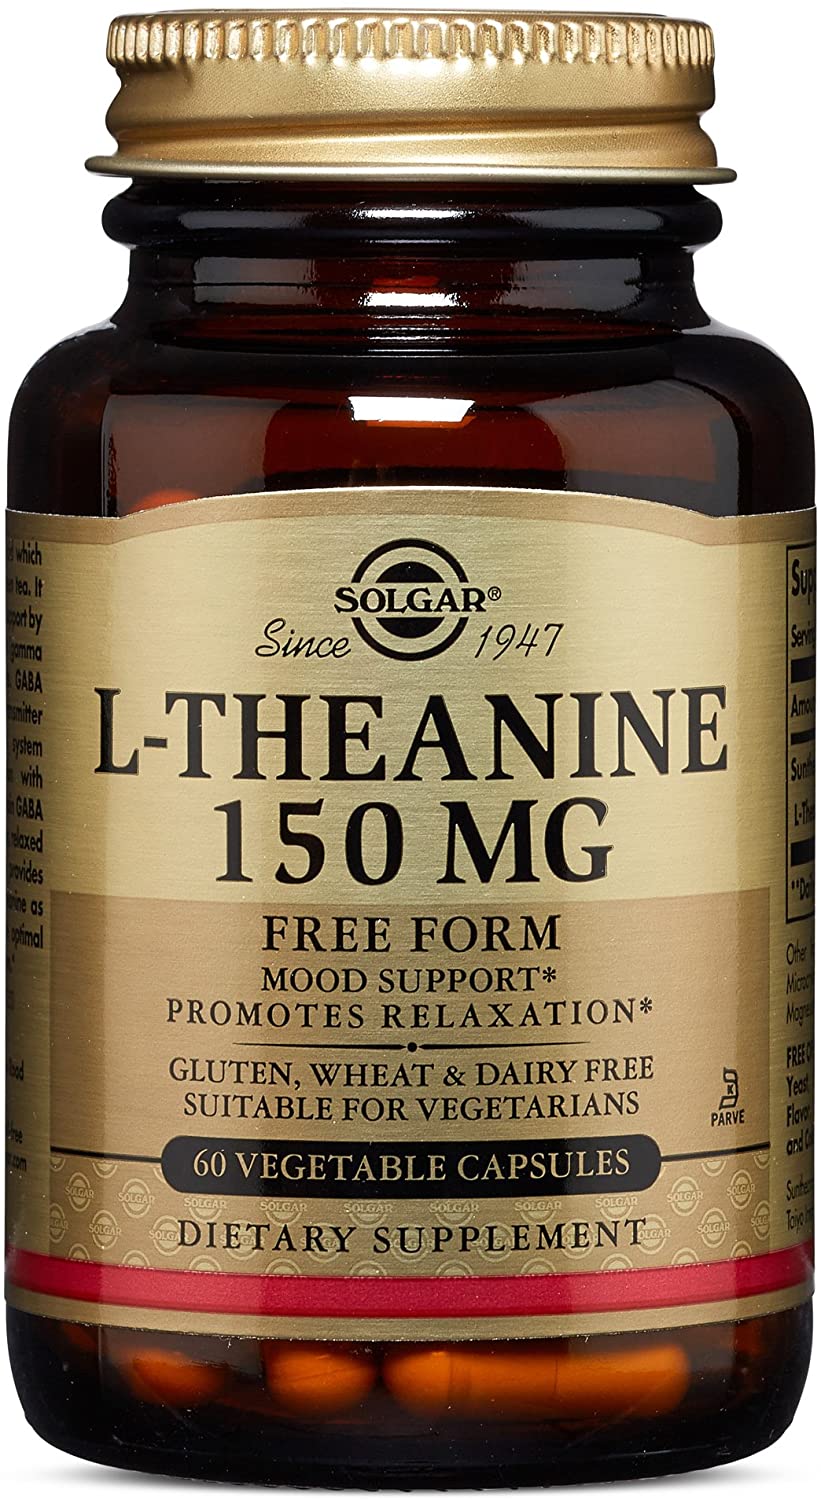 60  VEGETABLE CAPSULES  · L-THEANINE 150 MG